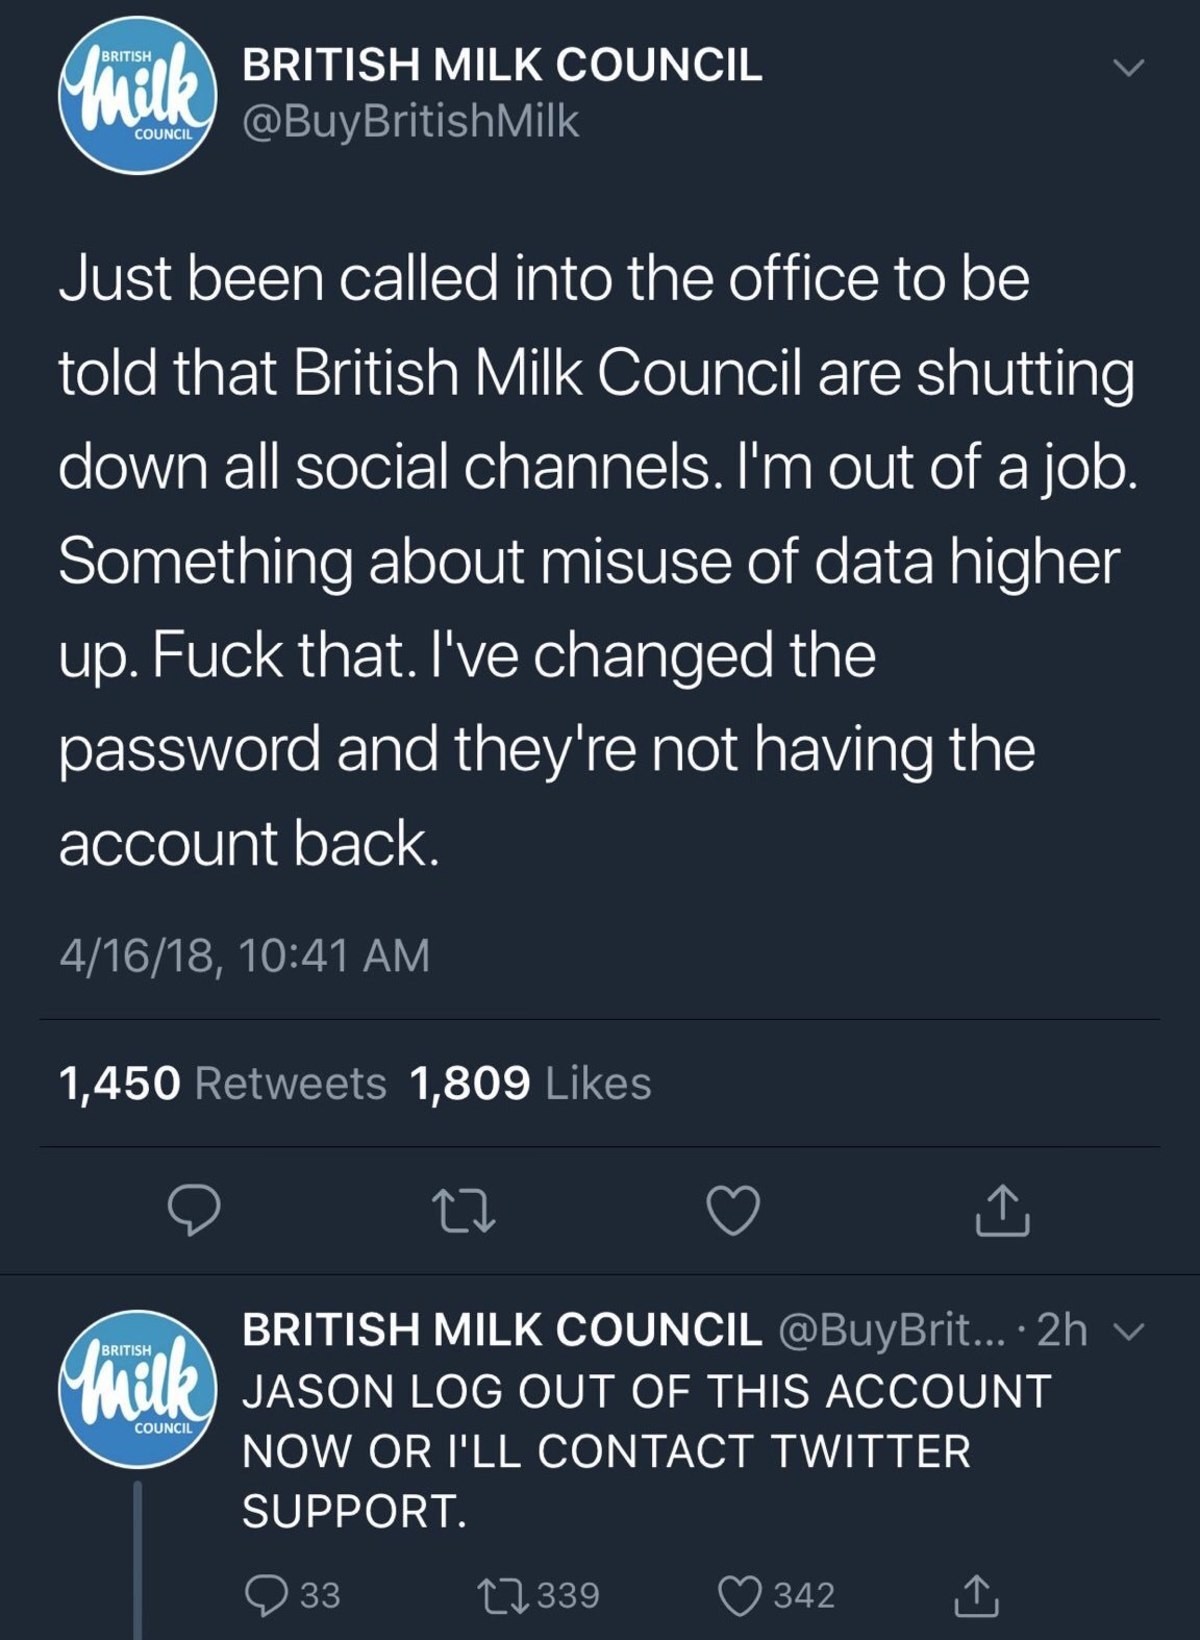 starstuffandalotofcoffee: hashtagdion:   shining-supernova:  holy SHIT ITS REALhttps://www.irishexaminer.com/examviral/apparent-spat-between-co-workers-on-a-milk-companys-twitter-account-is-comedy-gold-837785.html